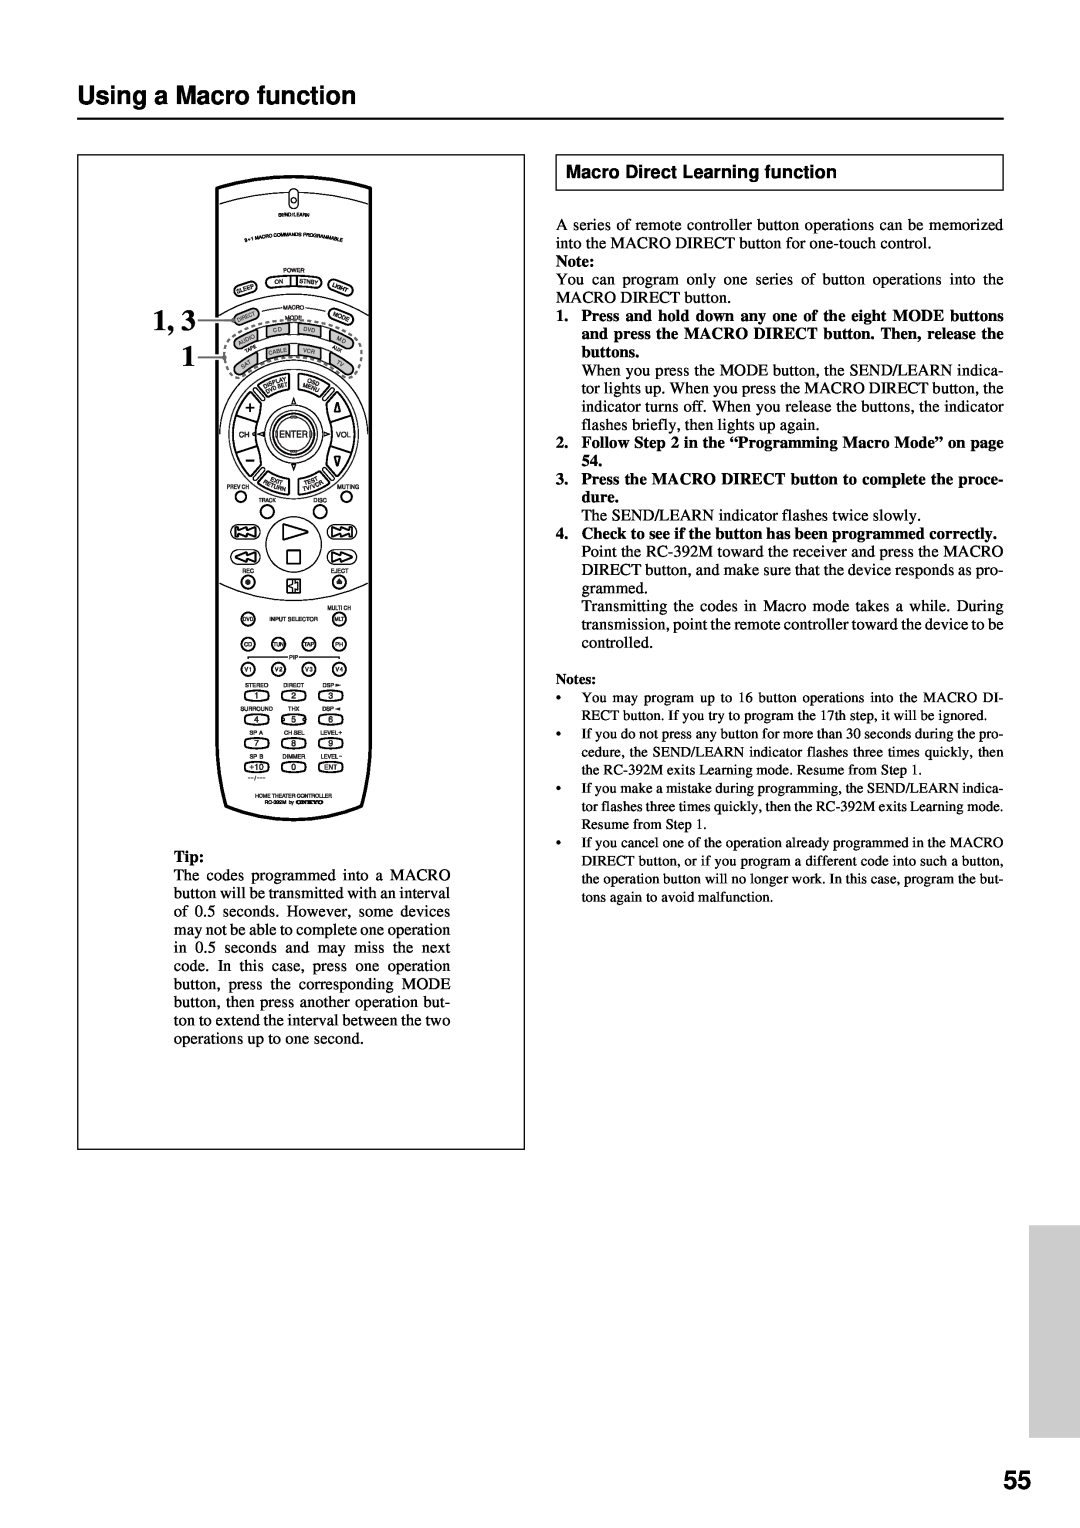 Integra DTR-7 instruction manual Using a Macro function, Macro Direct Learning function 